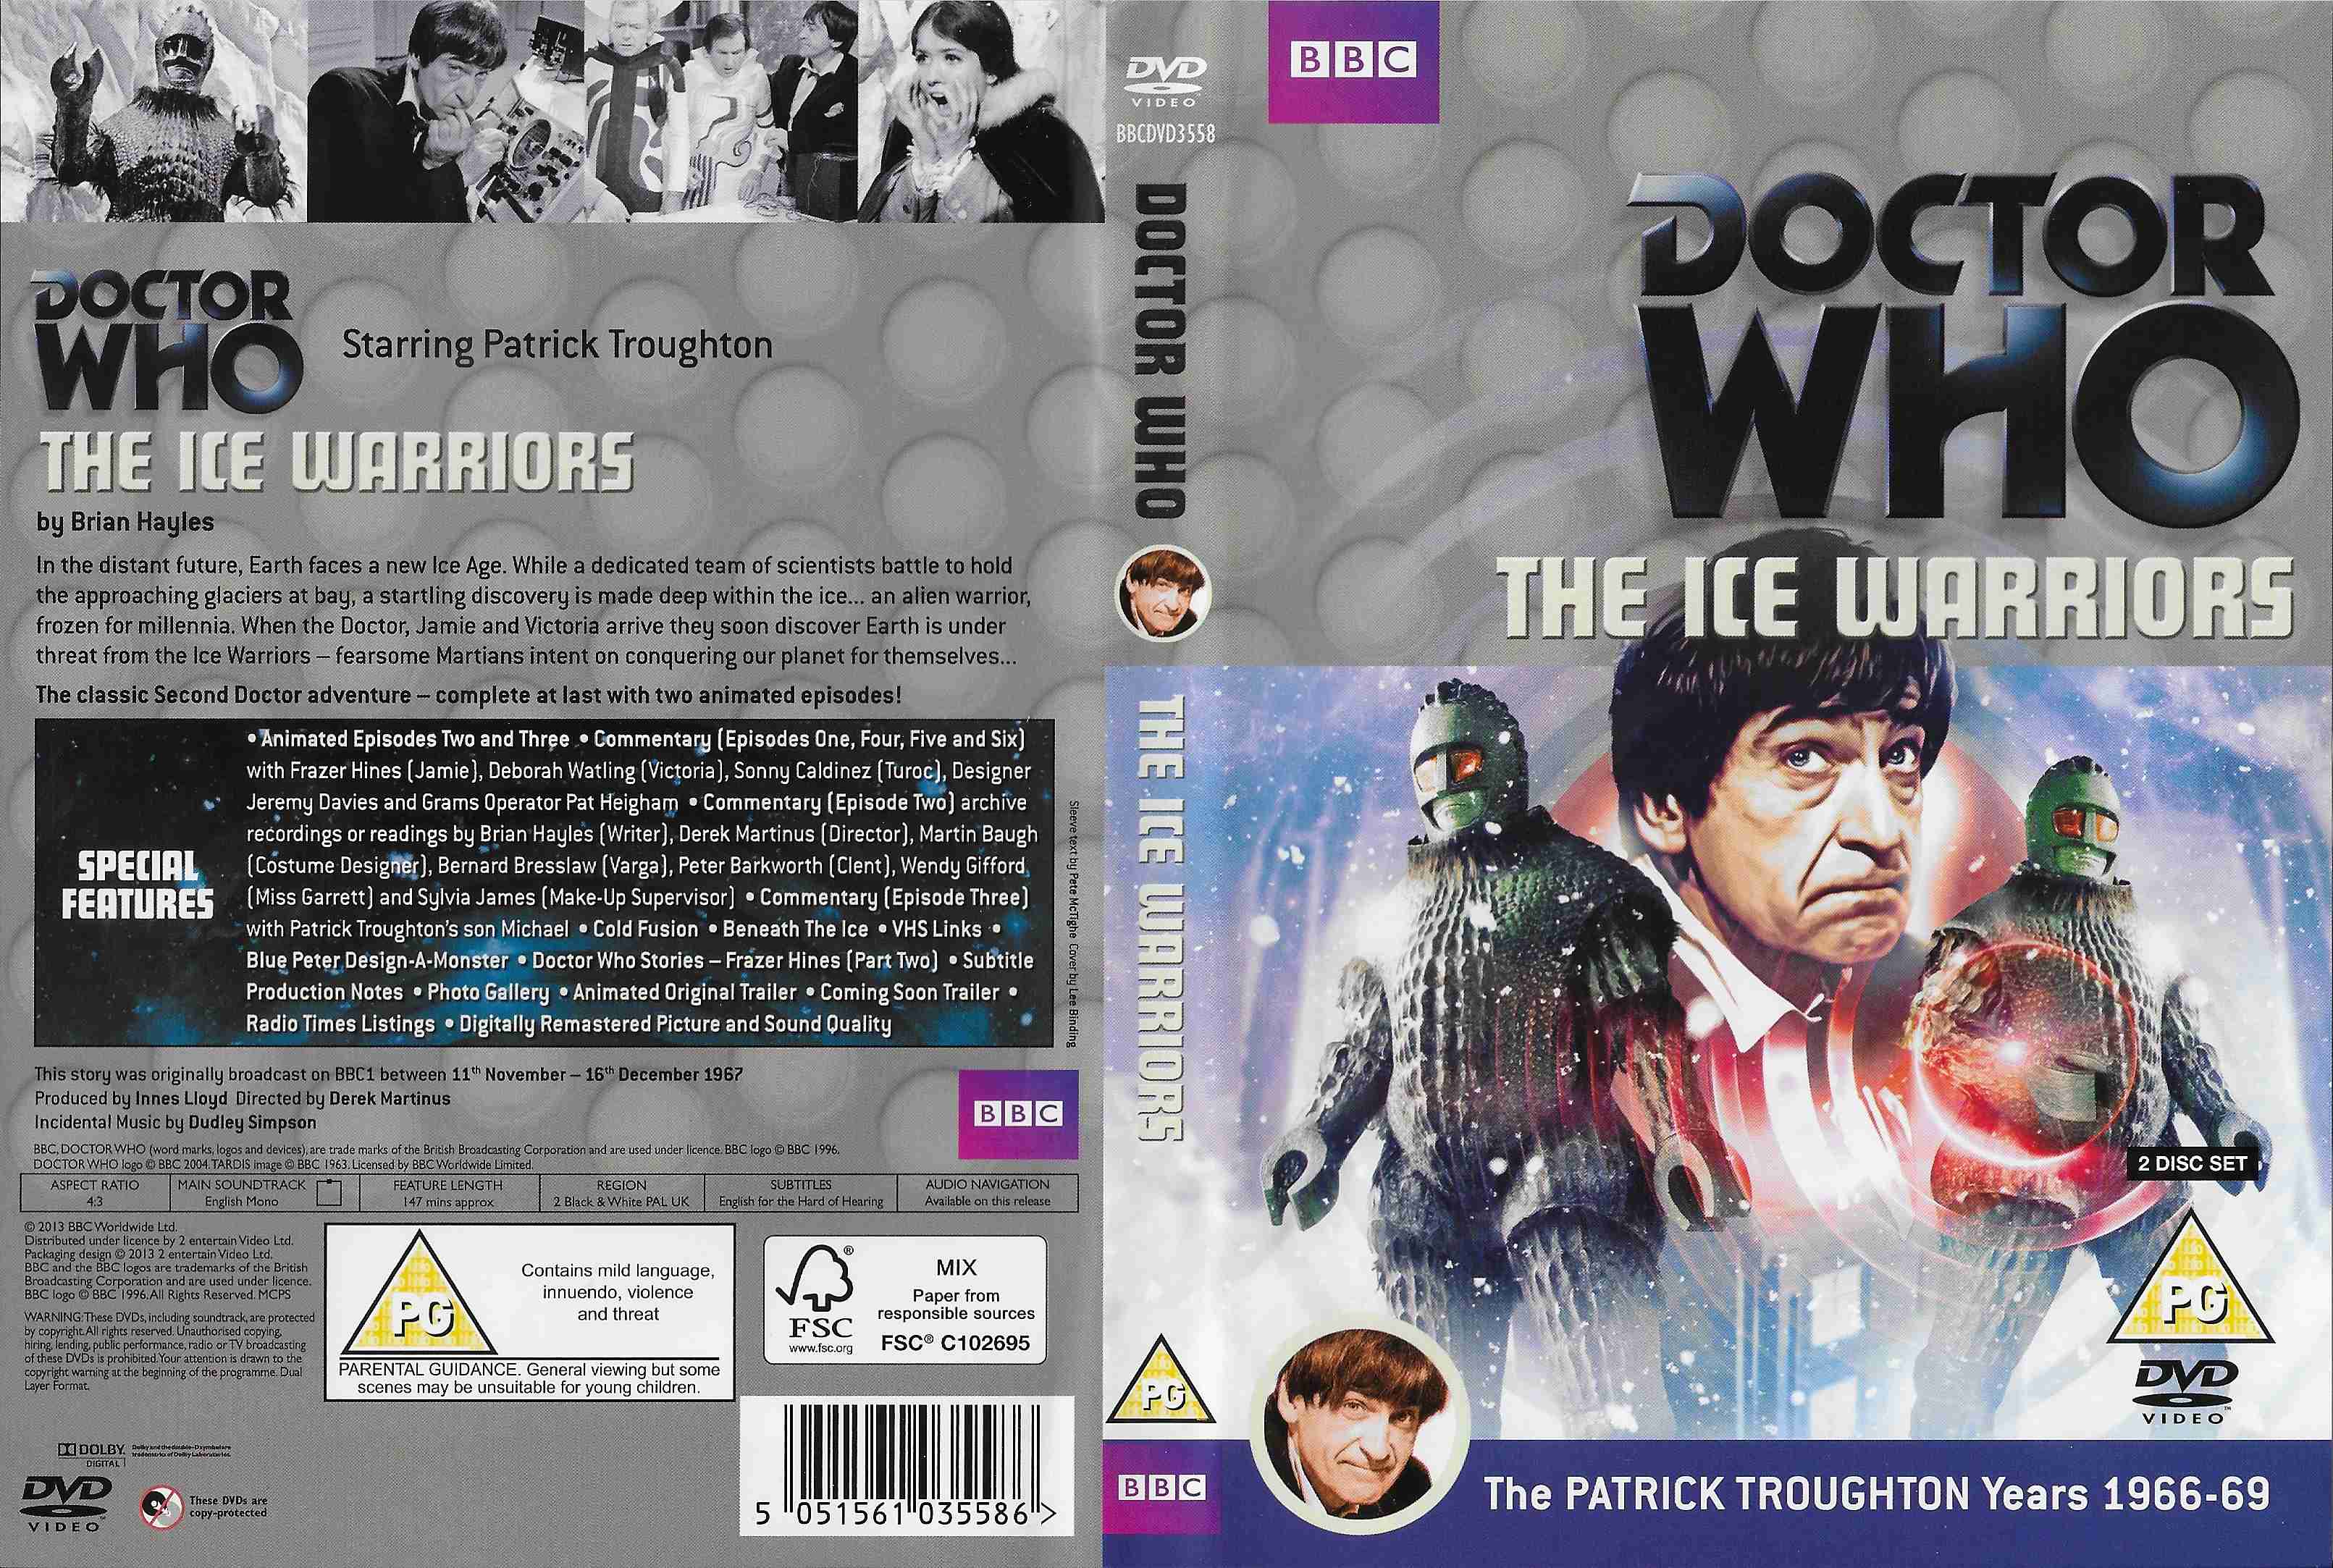 Picture of BBCDVD 3558 Doctor Who - The ice warriors by artist Brian Hayles from the BBC records and Tapes library